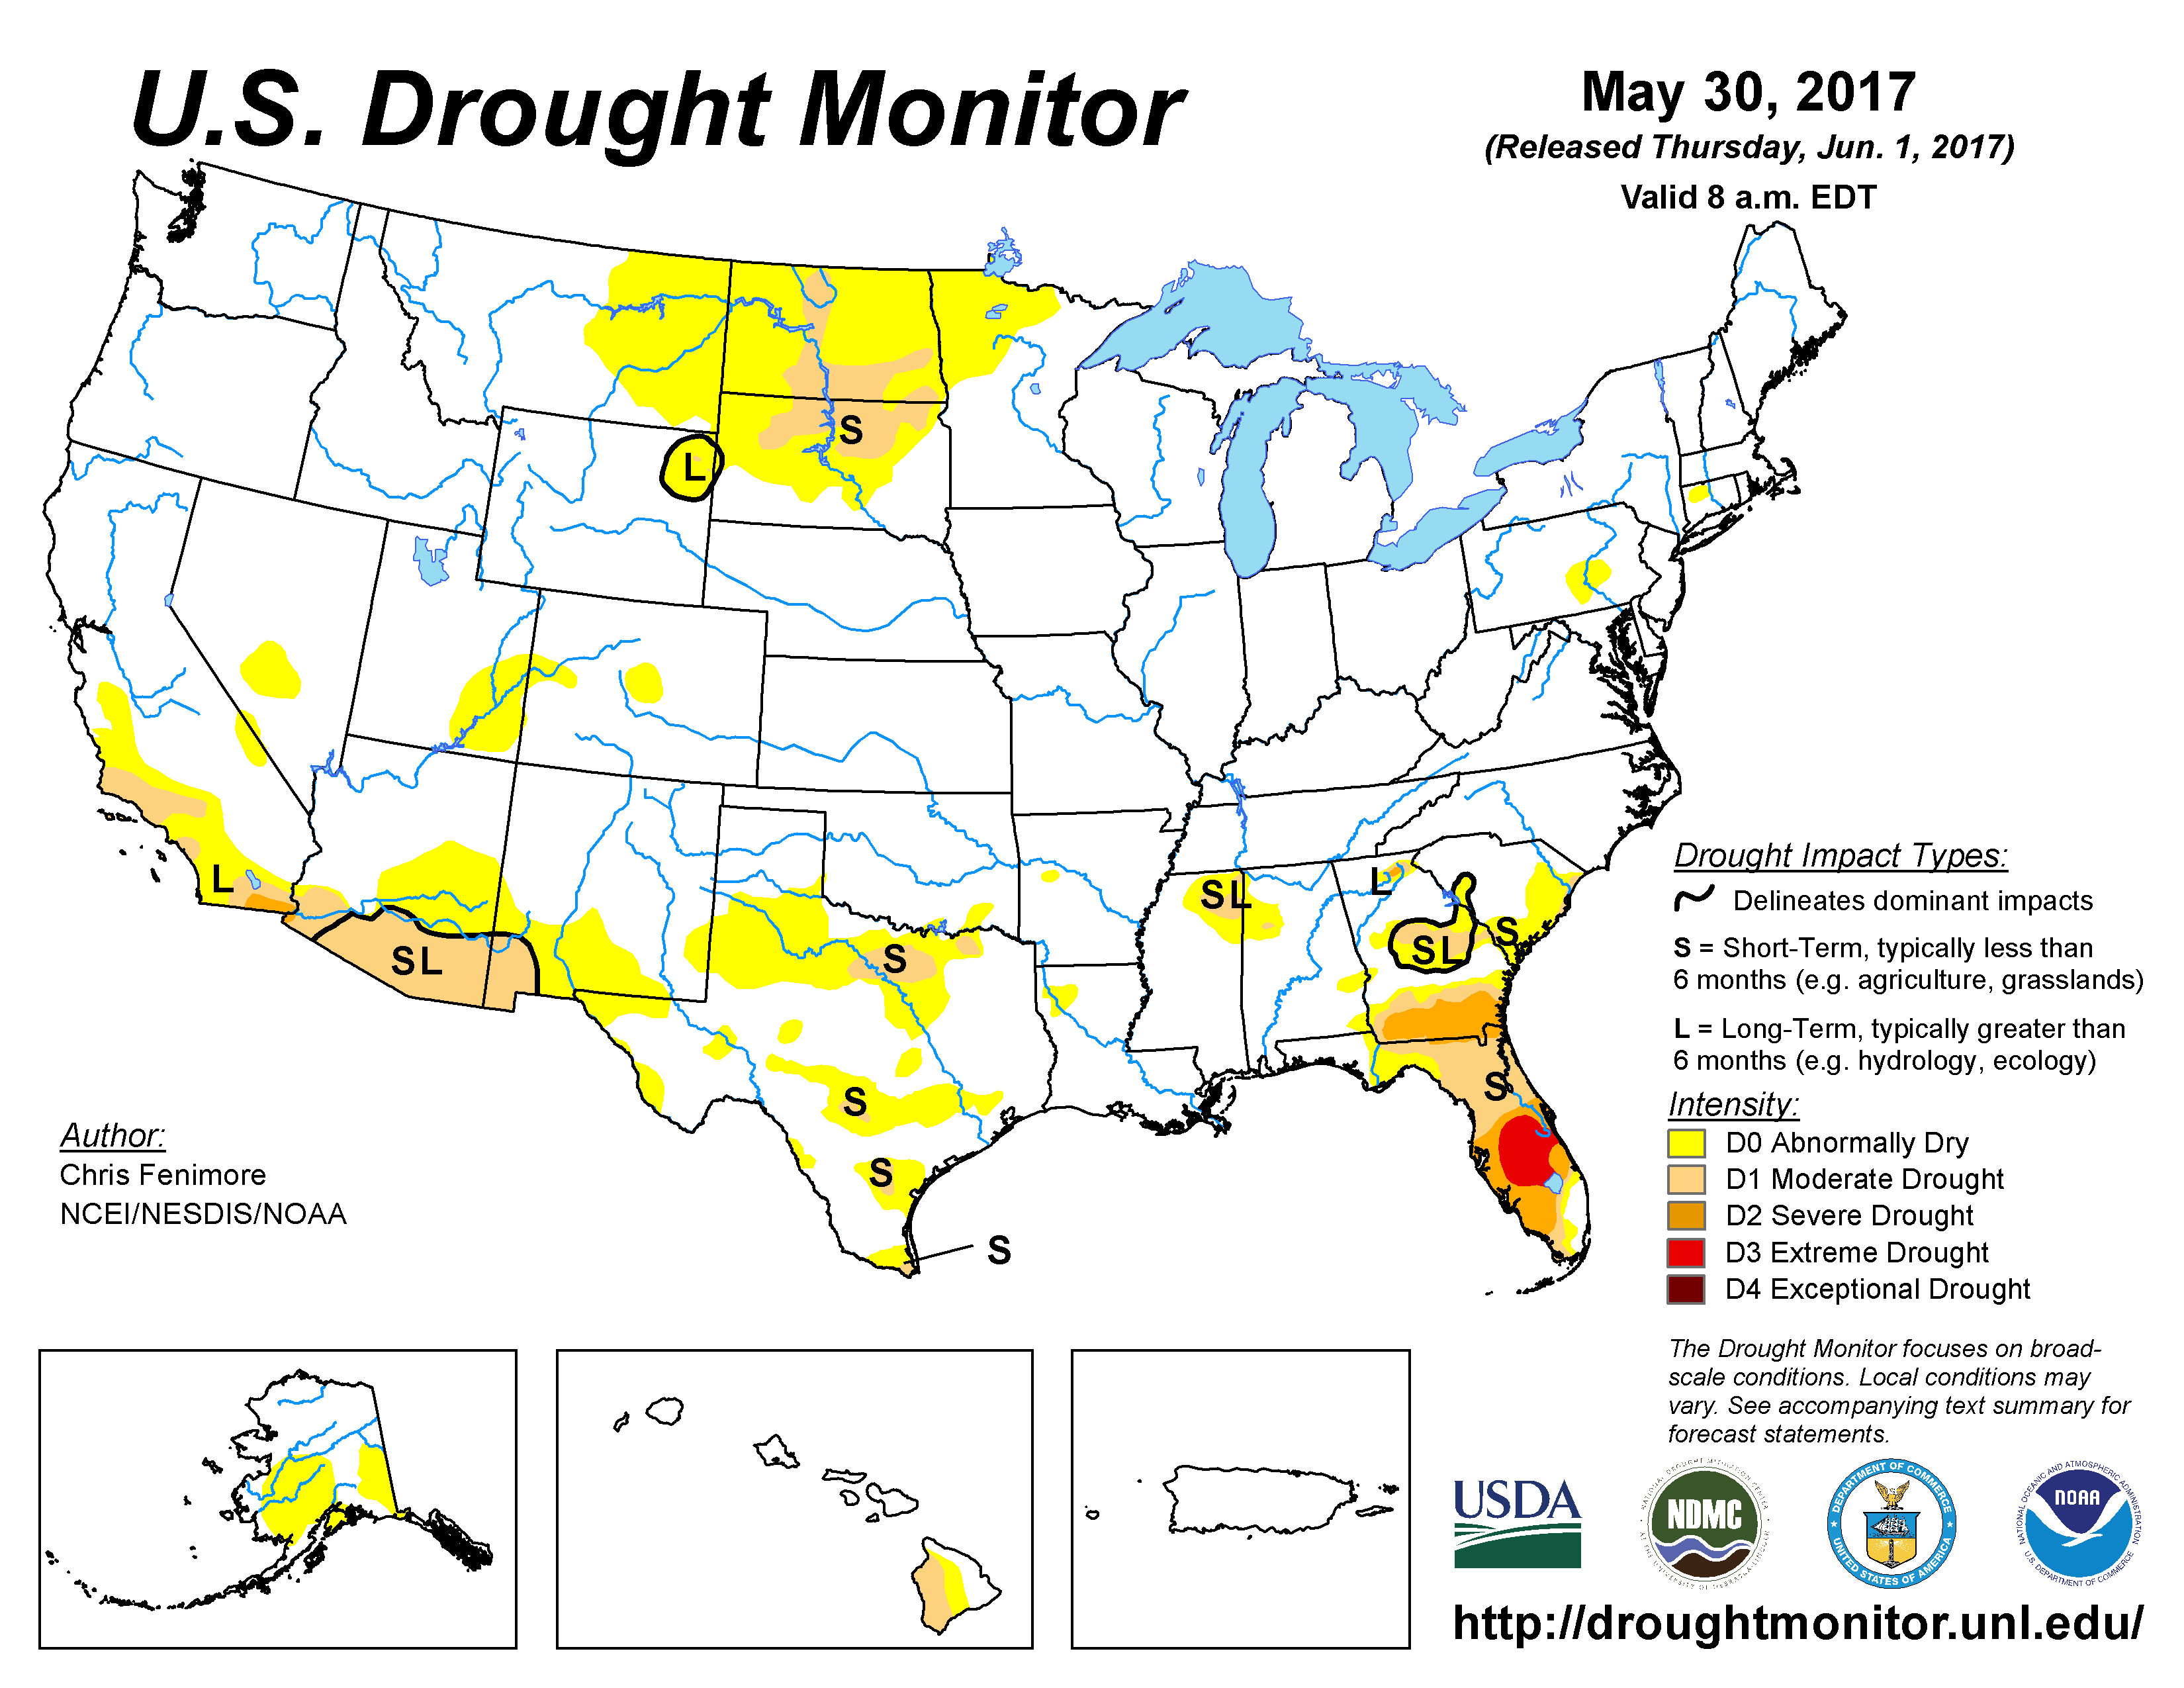 The U.S. Drought Monitor drought map valid May 30, 2017